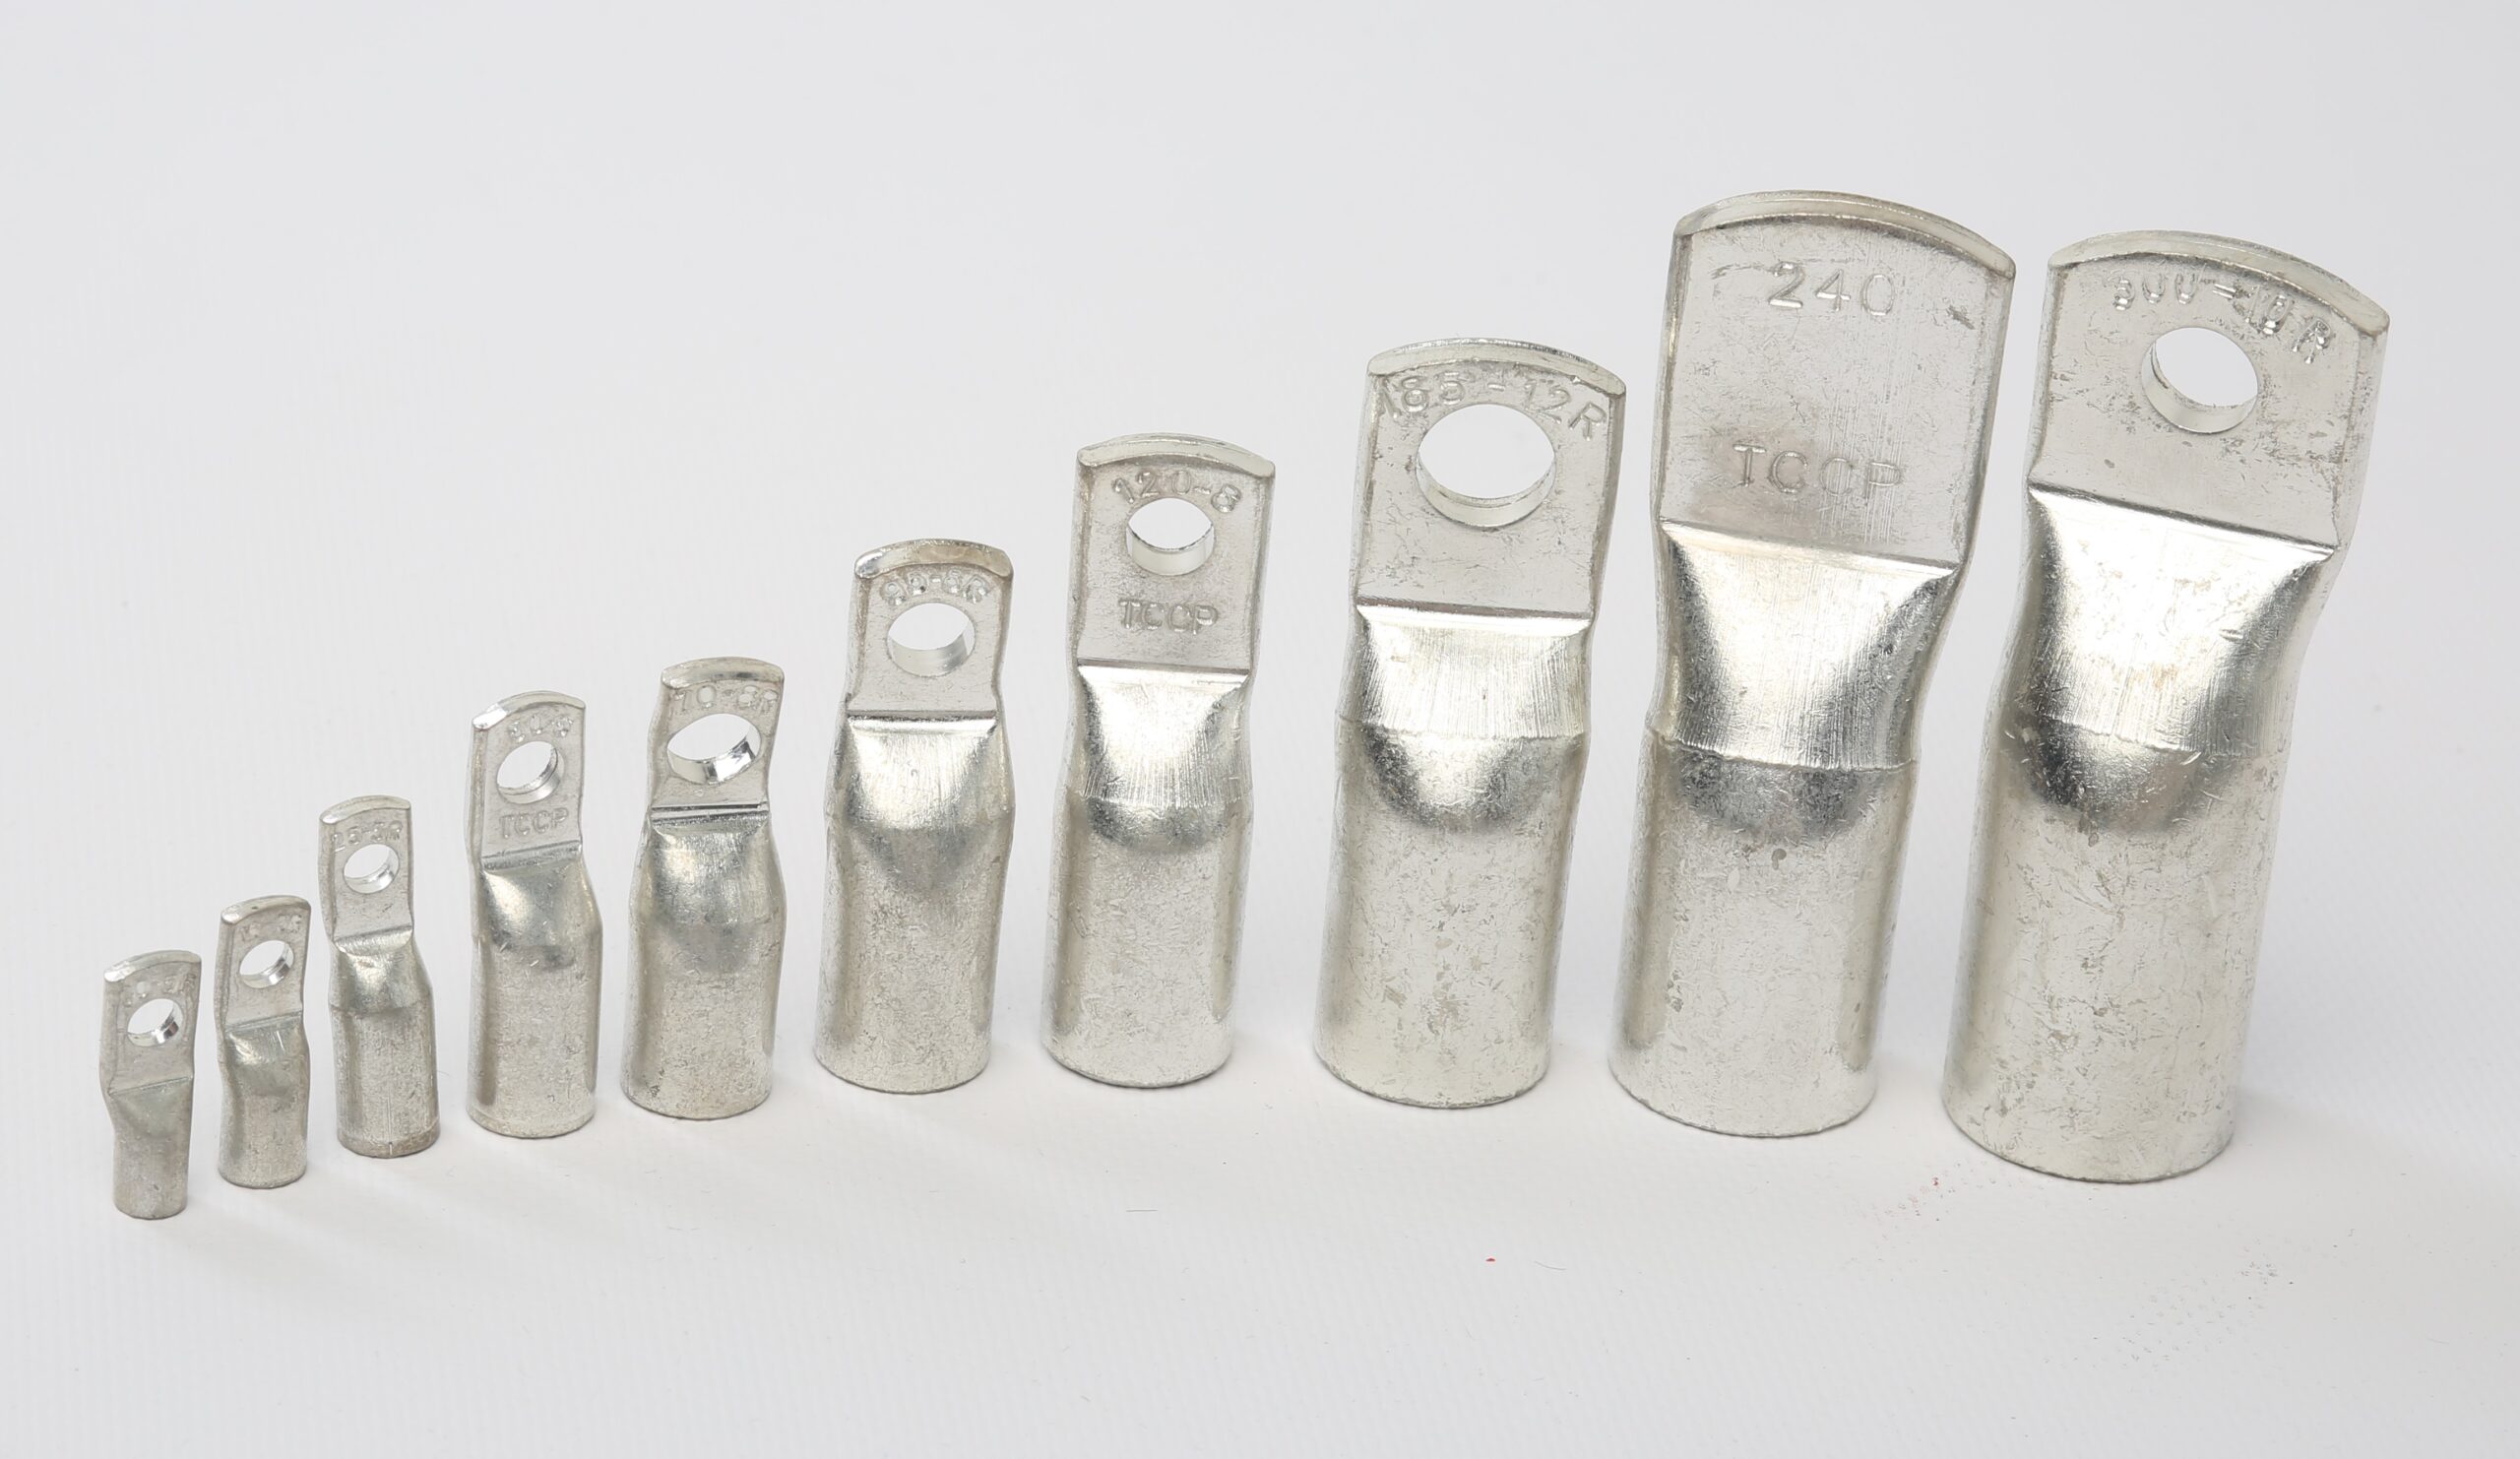 A display of contained palm lugs